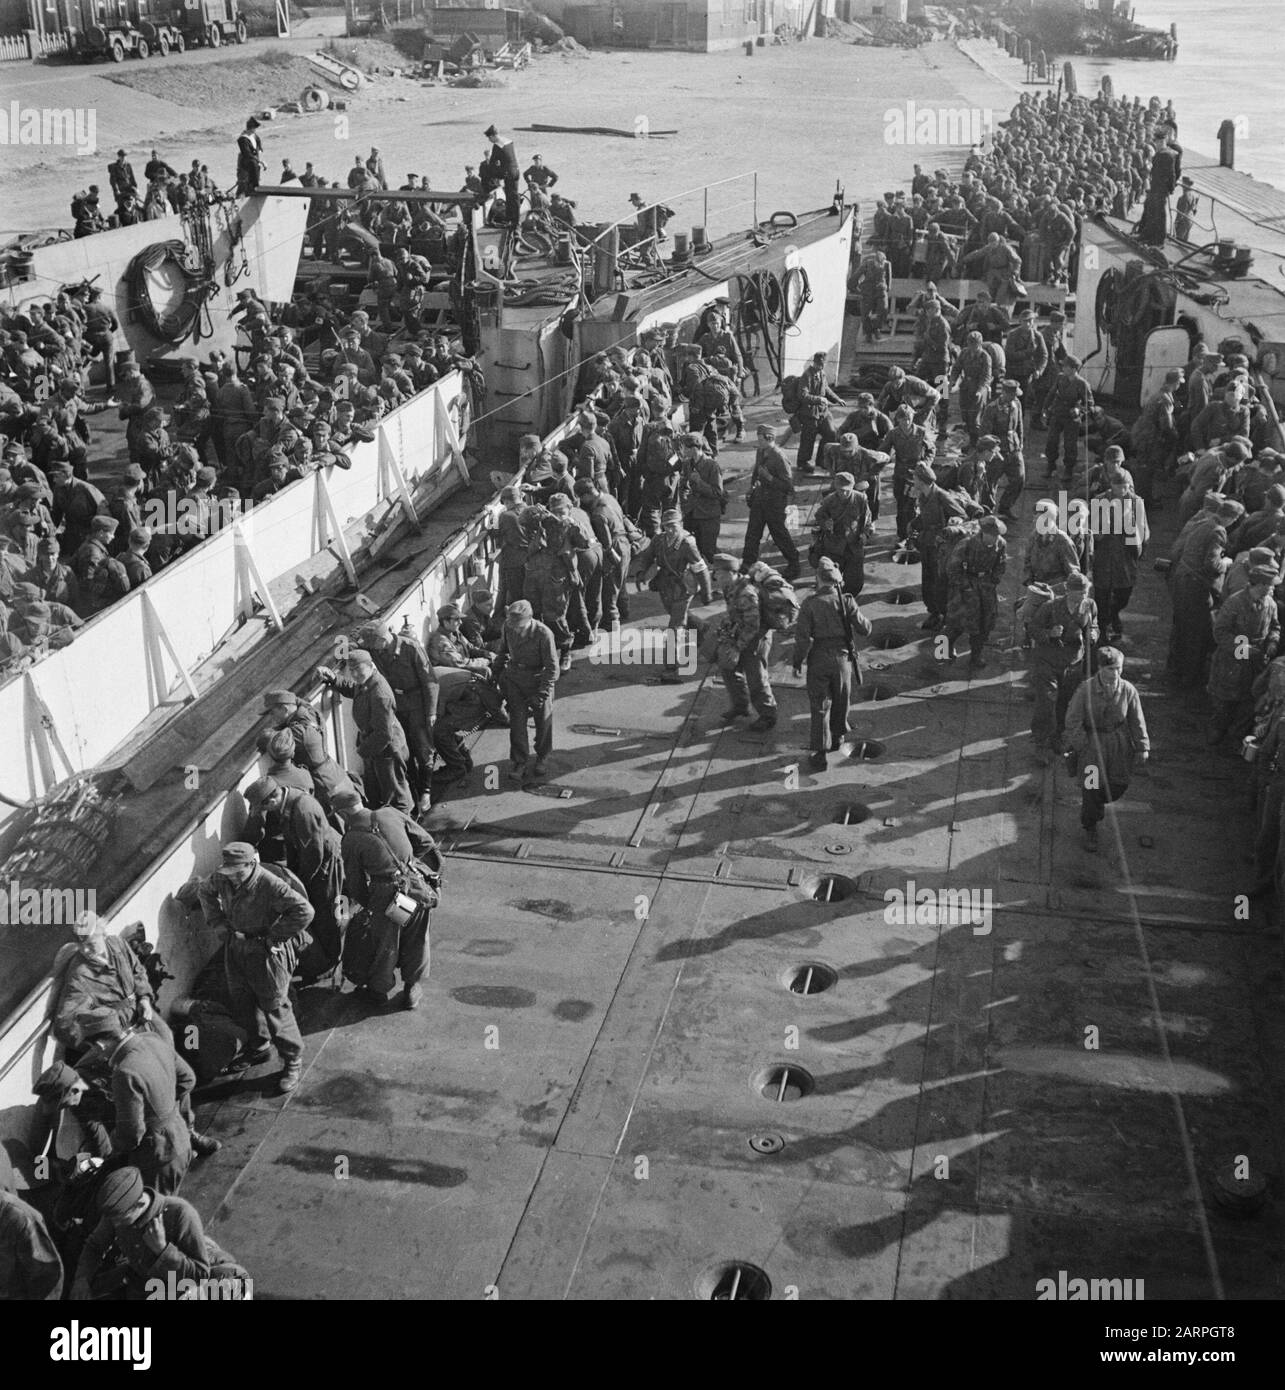 Capitulation: Den Helder  In Den Helder, the disarmed German soldiers are embarked in LCT boats for Harlingen, from where the long journey to the Heimat is made on foot. Date: June 1945 Location: Den Helder Keywords: prisoners of war, ships, World War II Stock Photo